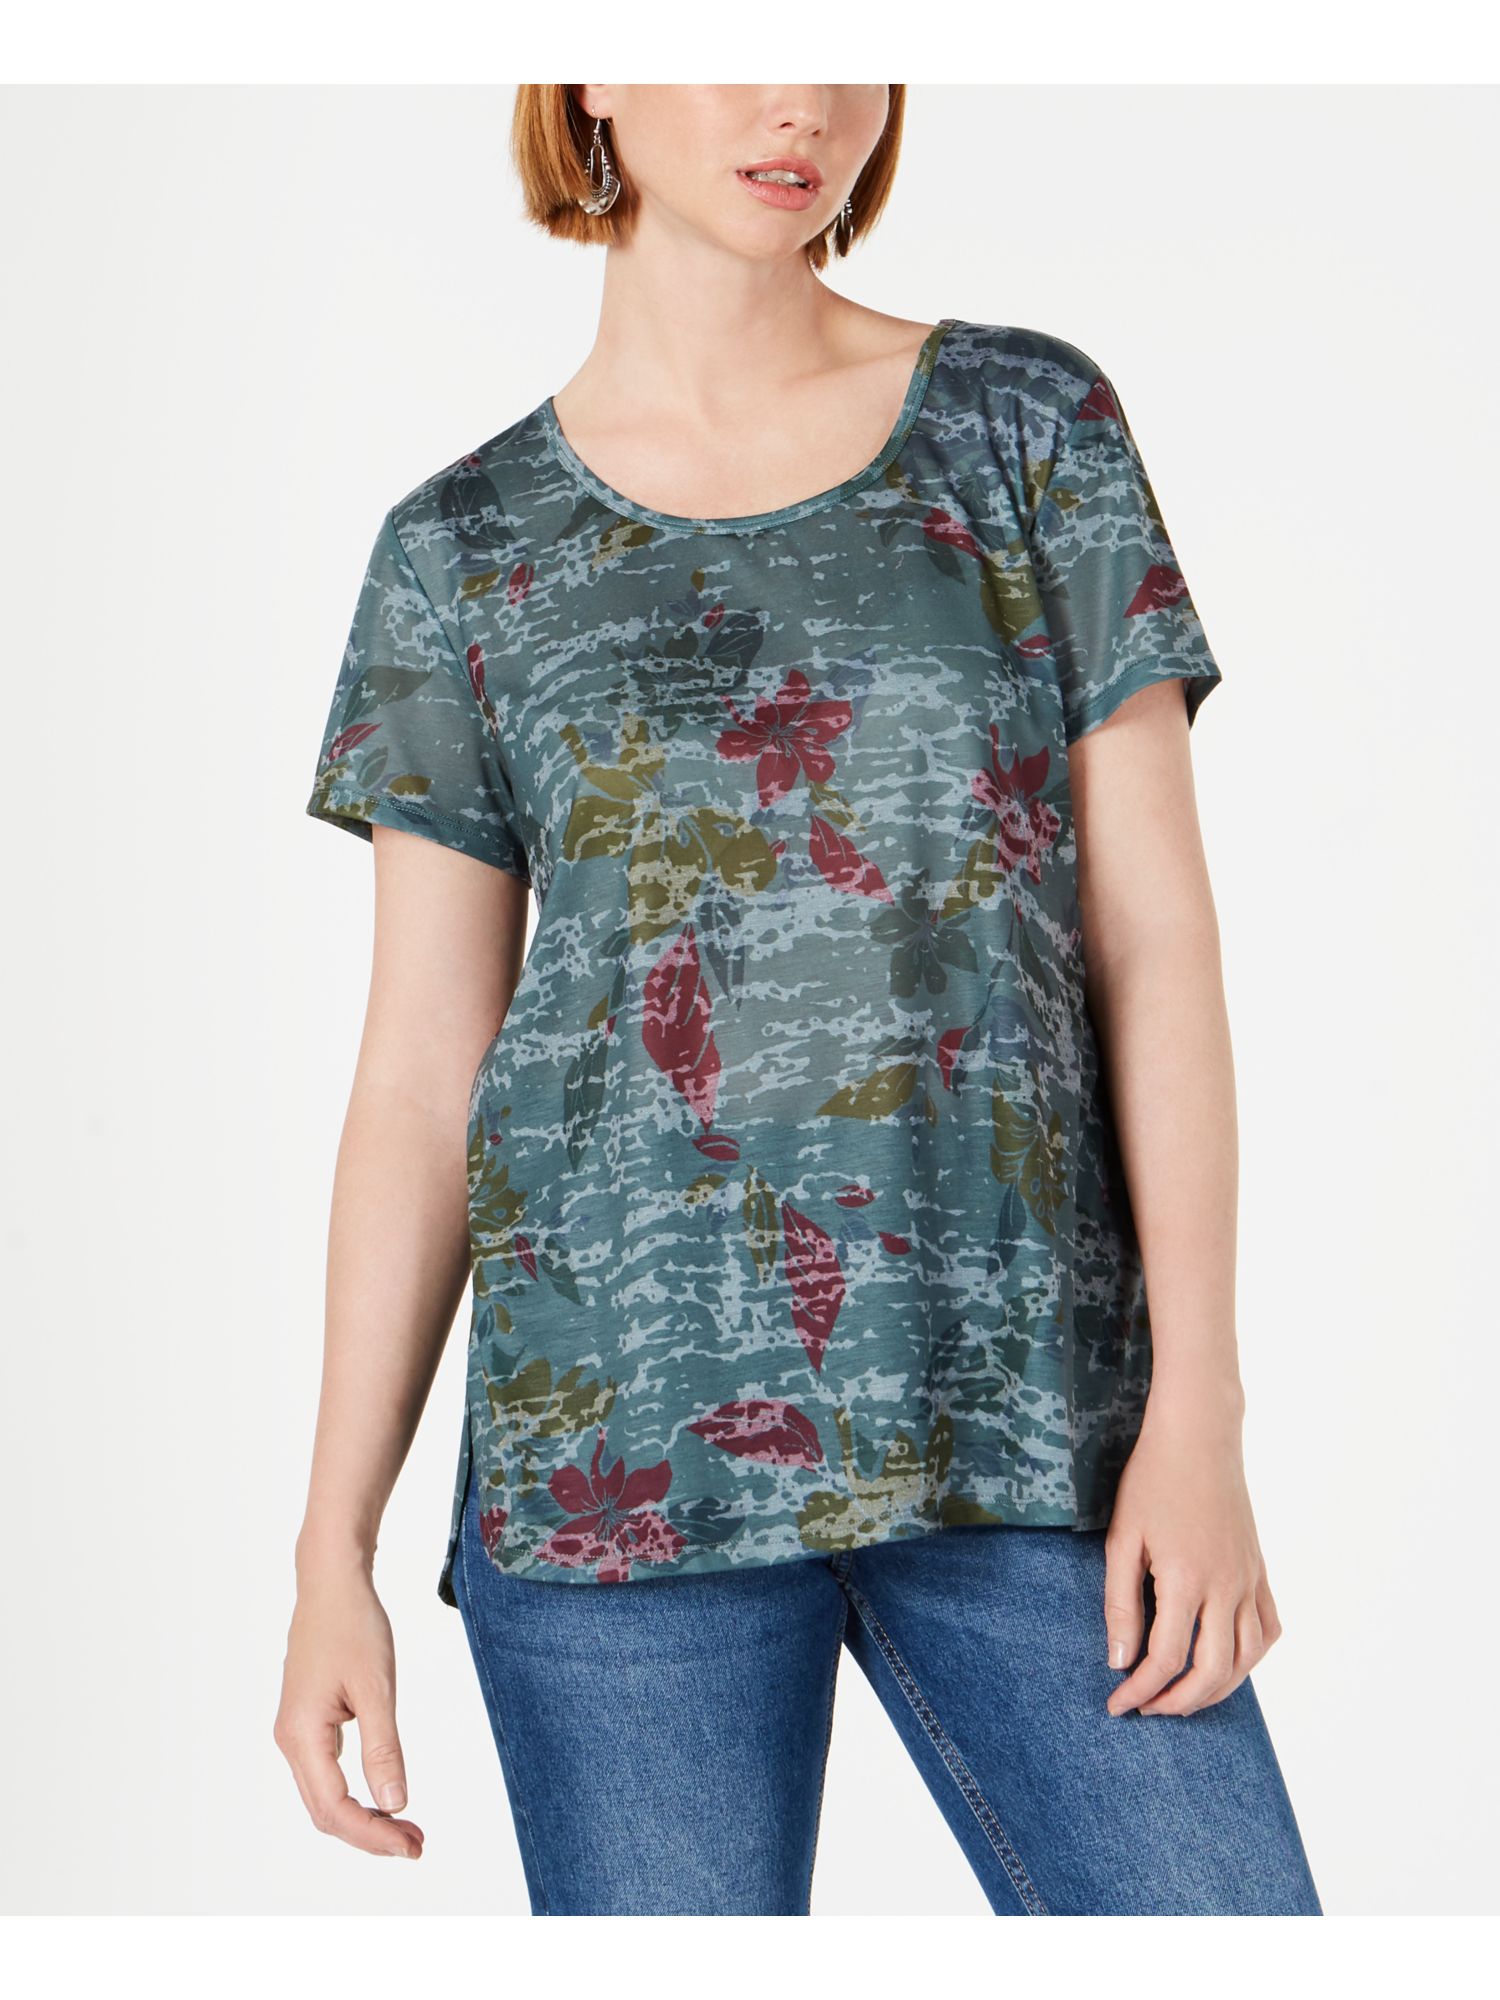 STYLE & COMPANY Womens Green Printed Short Sleeve Scoop Neck T-Shirt S - image 1 of 4